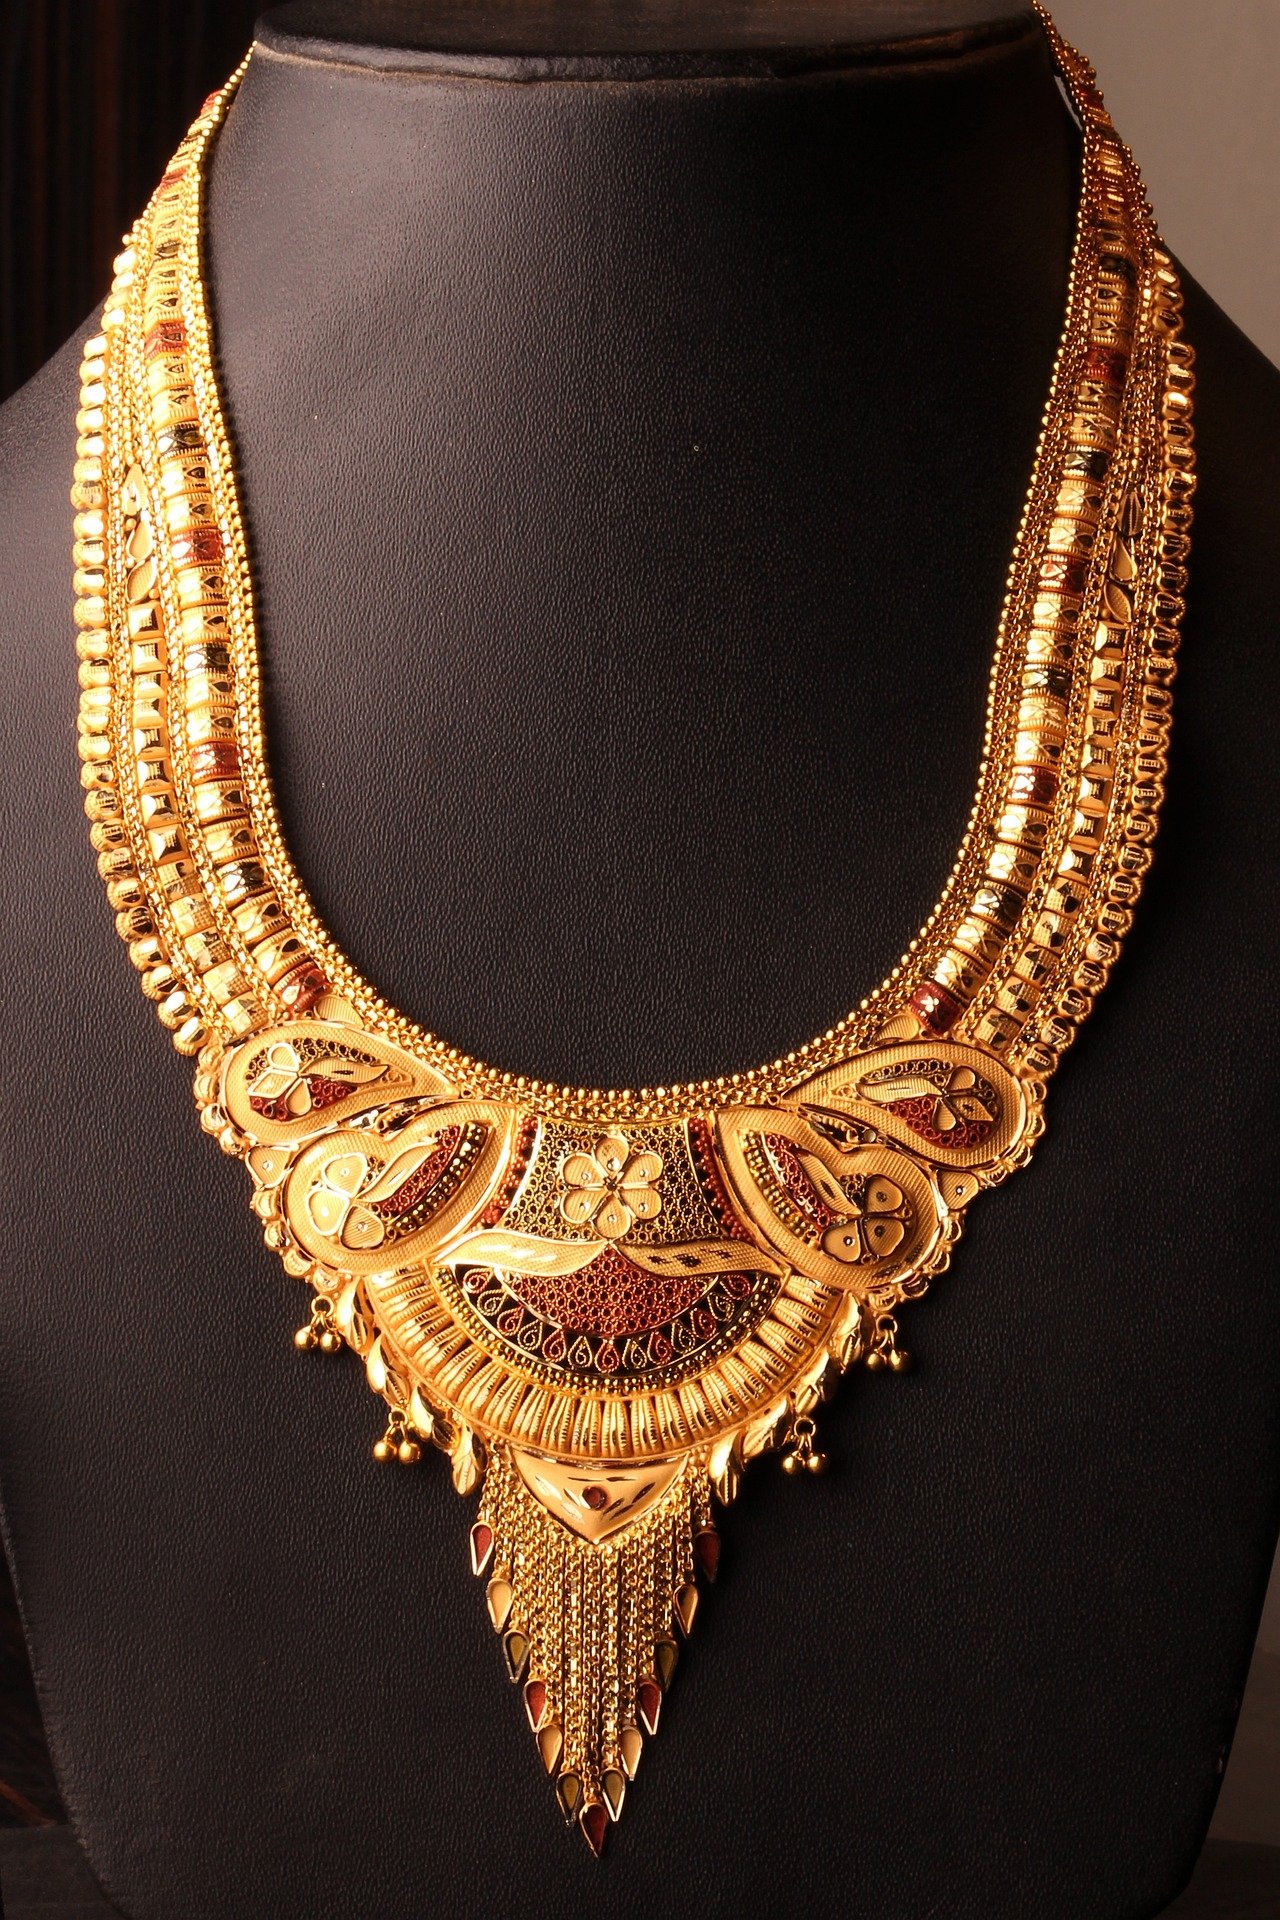 1881 gold necklace